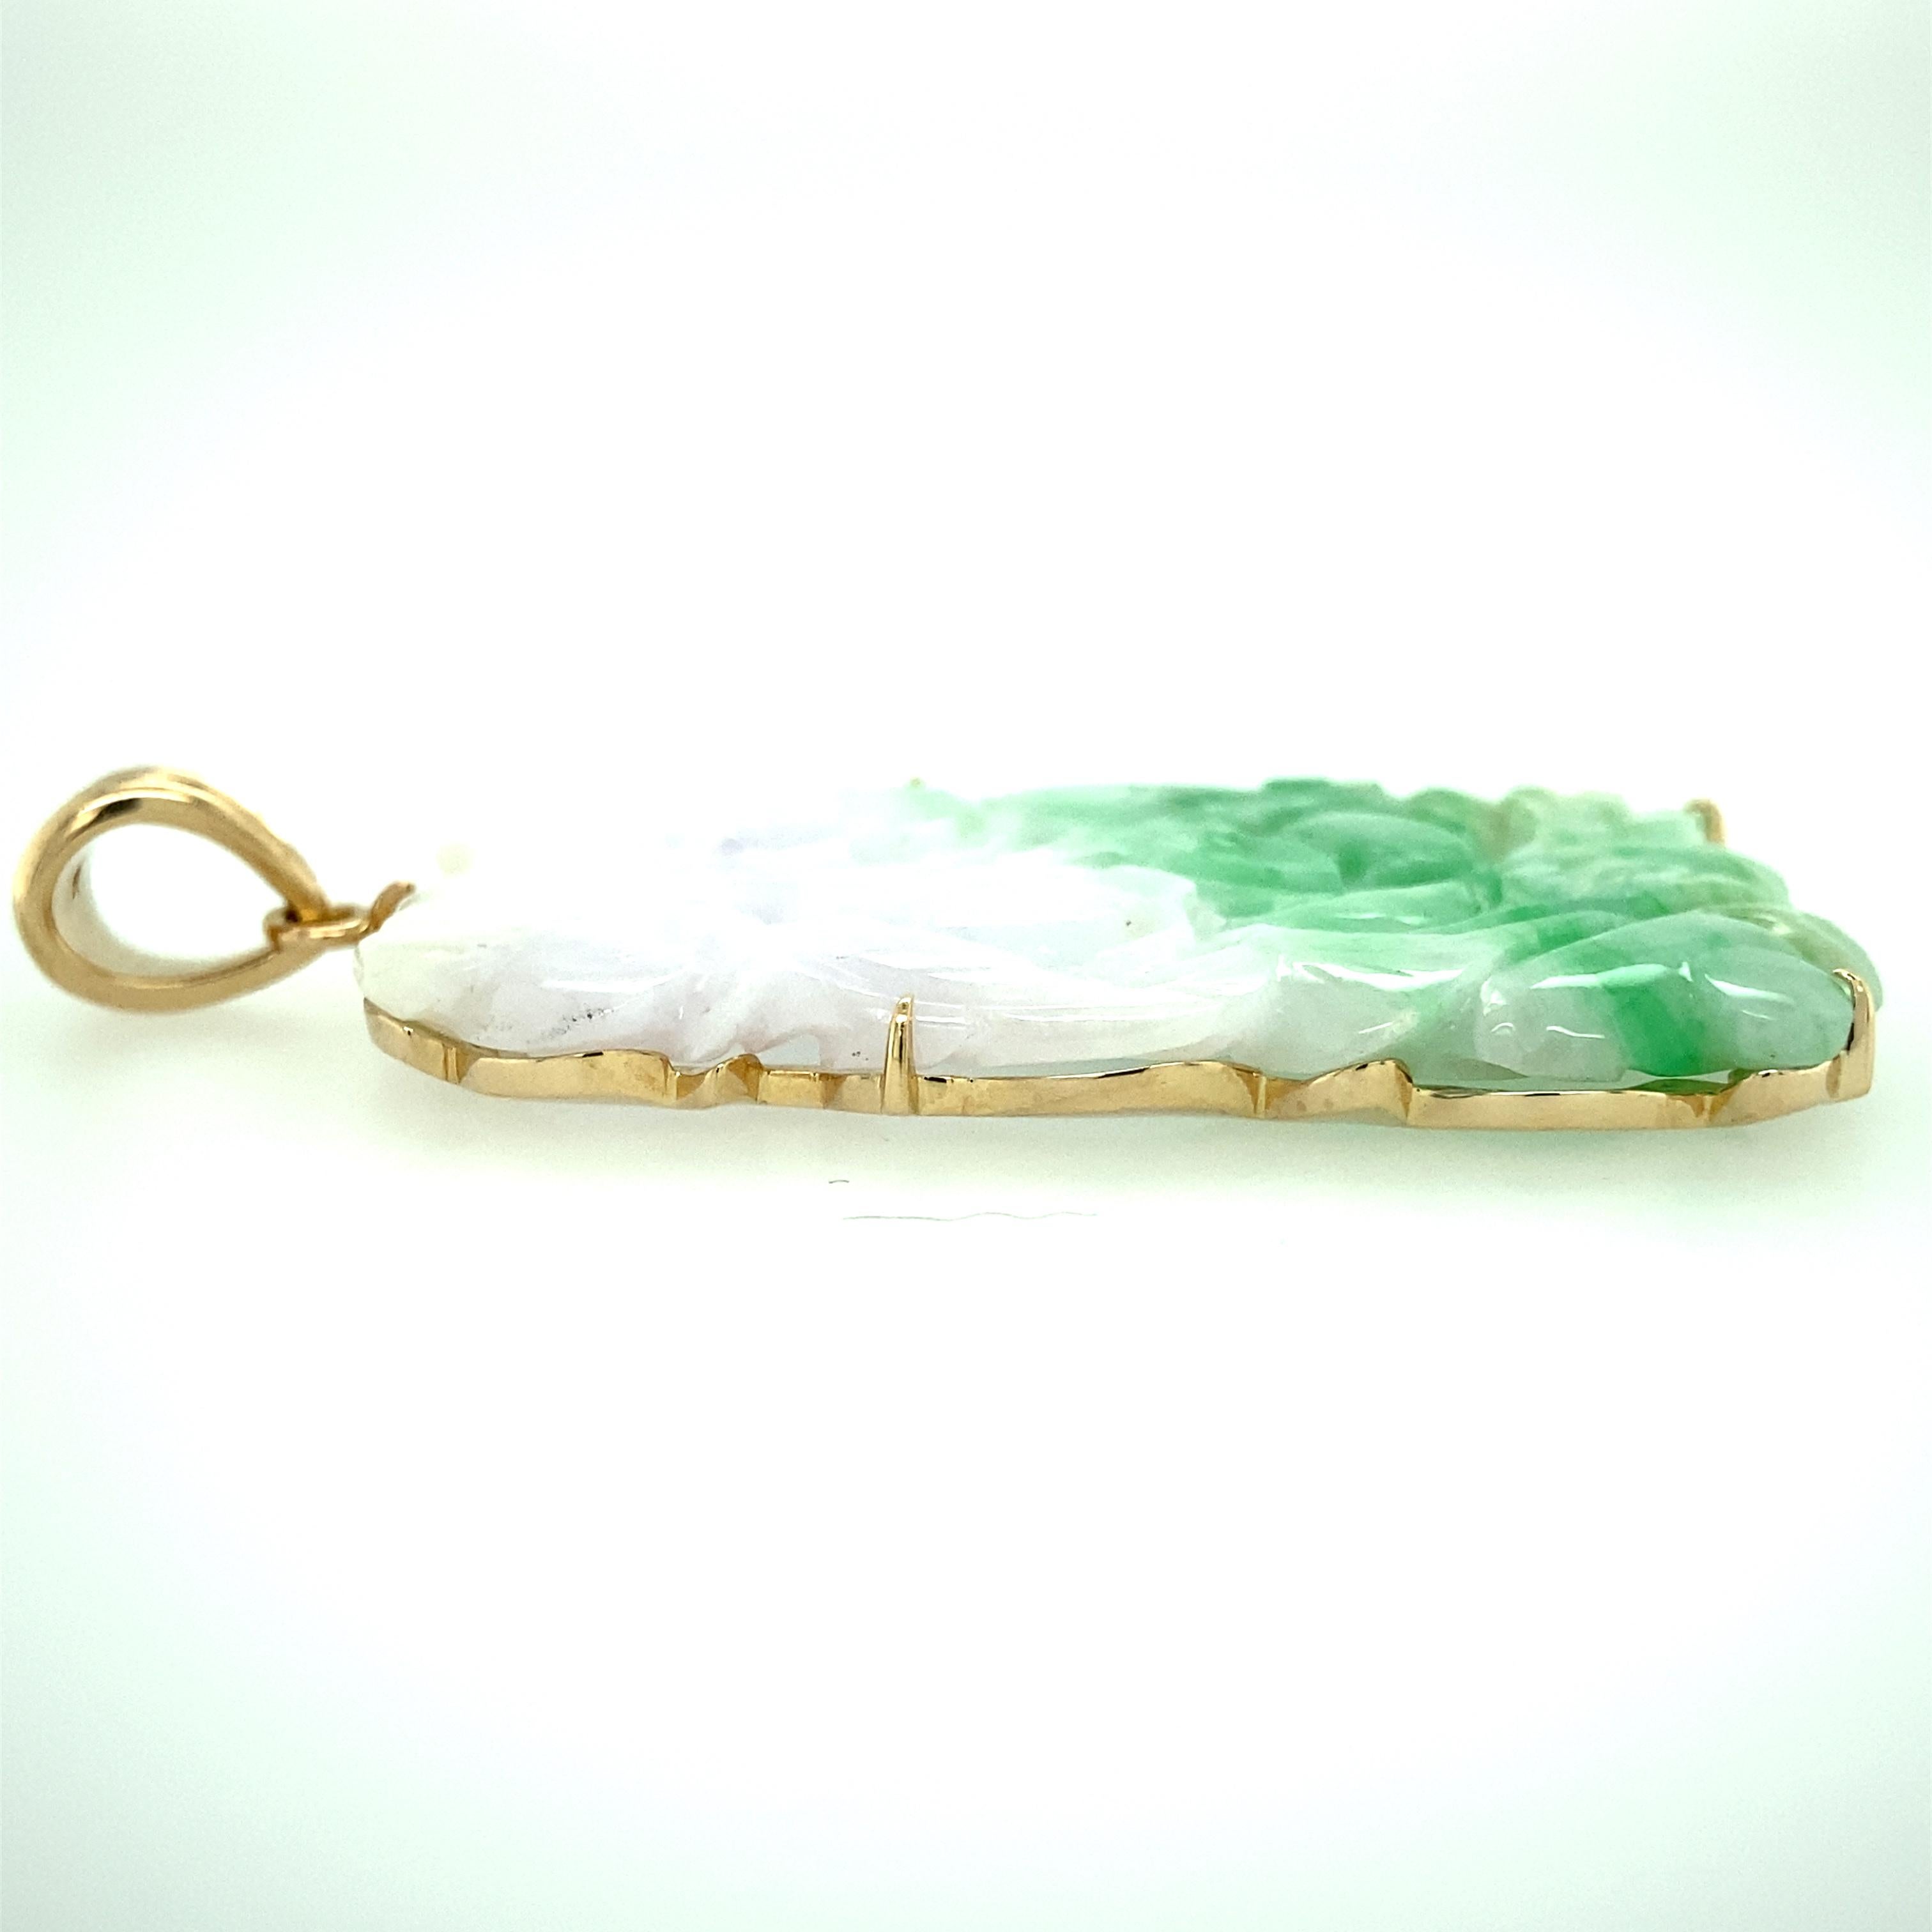 Modern 1970s White and Green Carved Jadeite Pendant